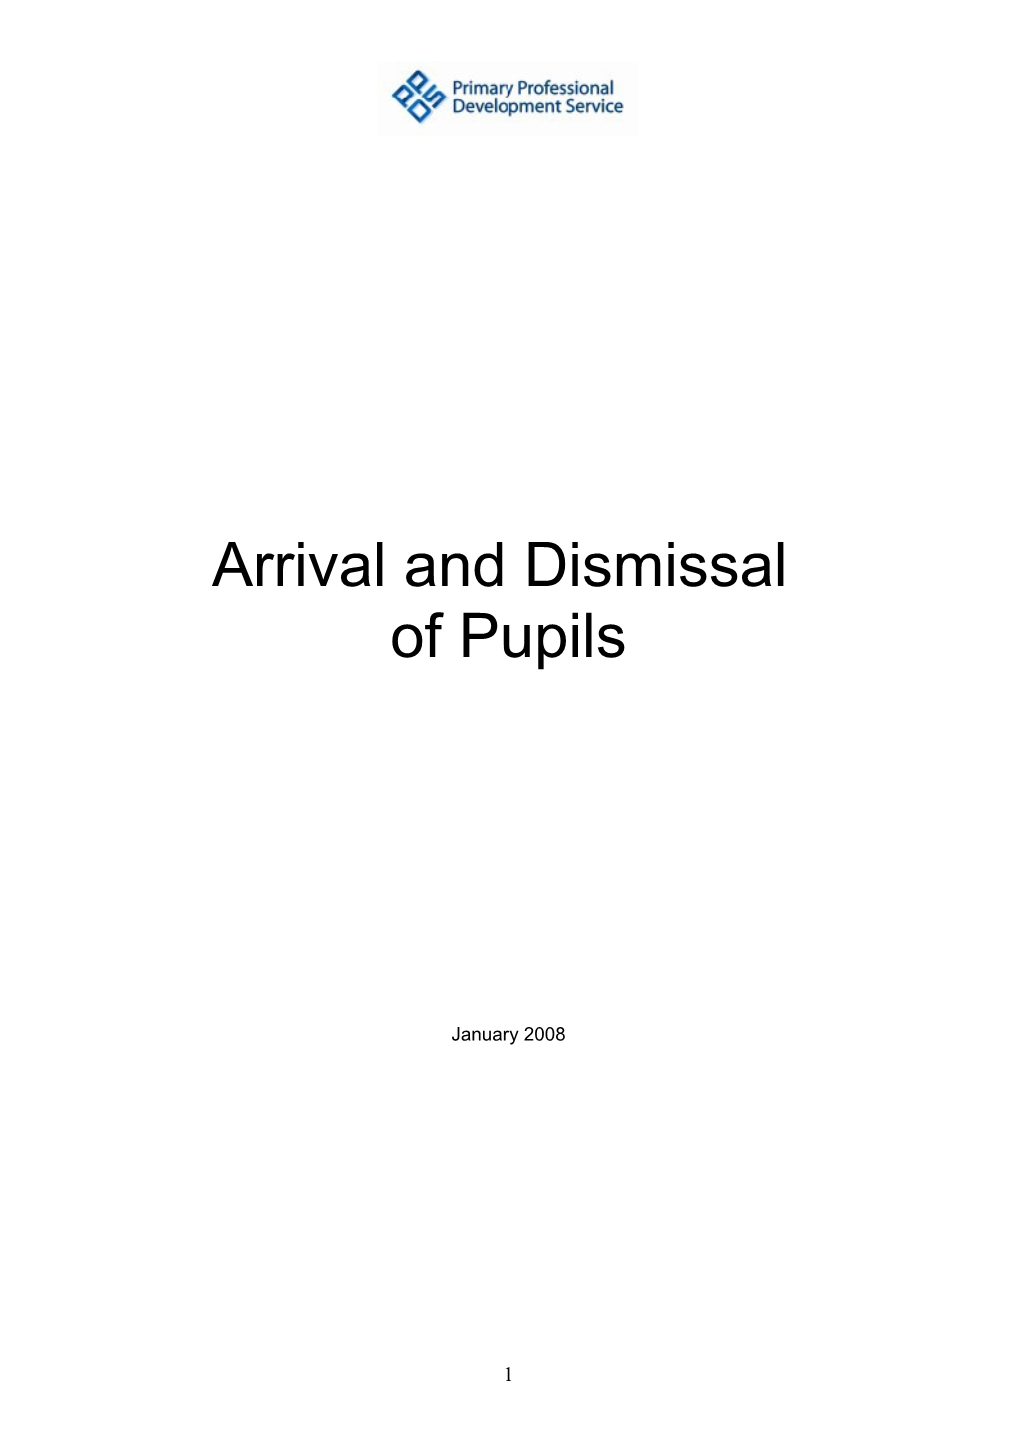 Arrival and Dismissal of Pupils